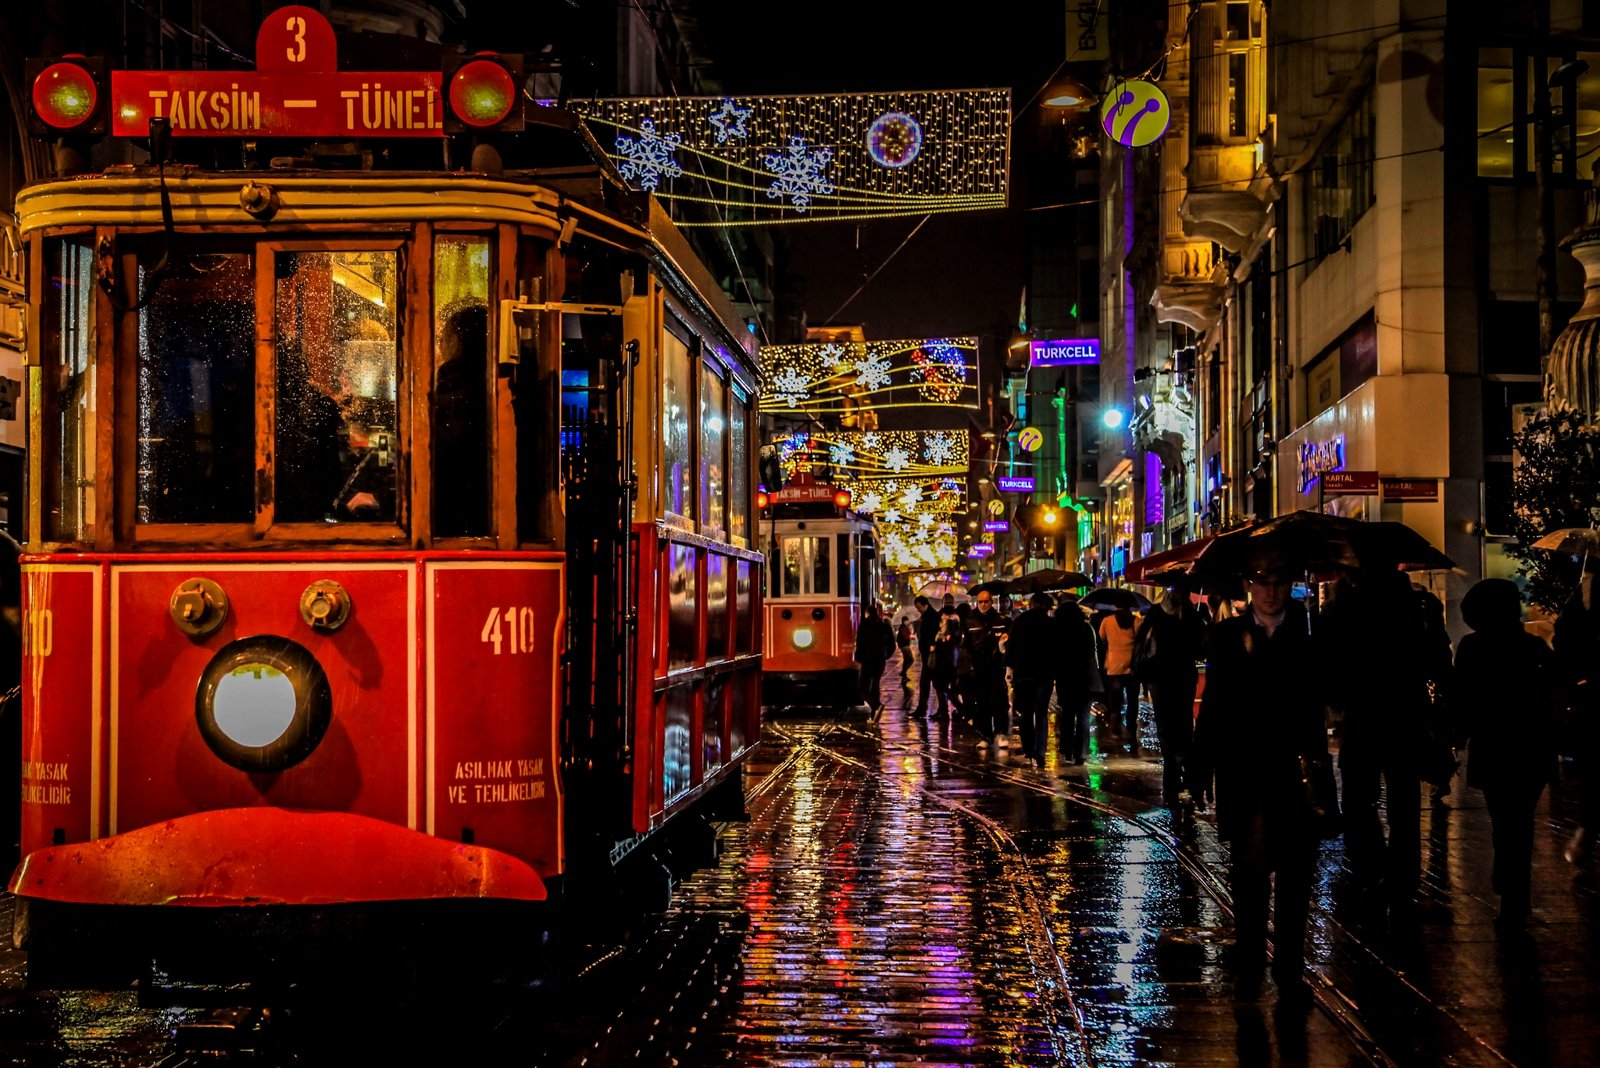 How to ride on the old tram in Beyoglu district in Istanbul